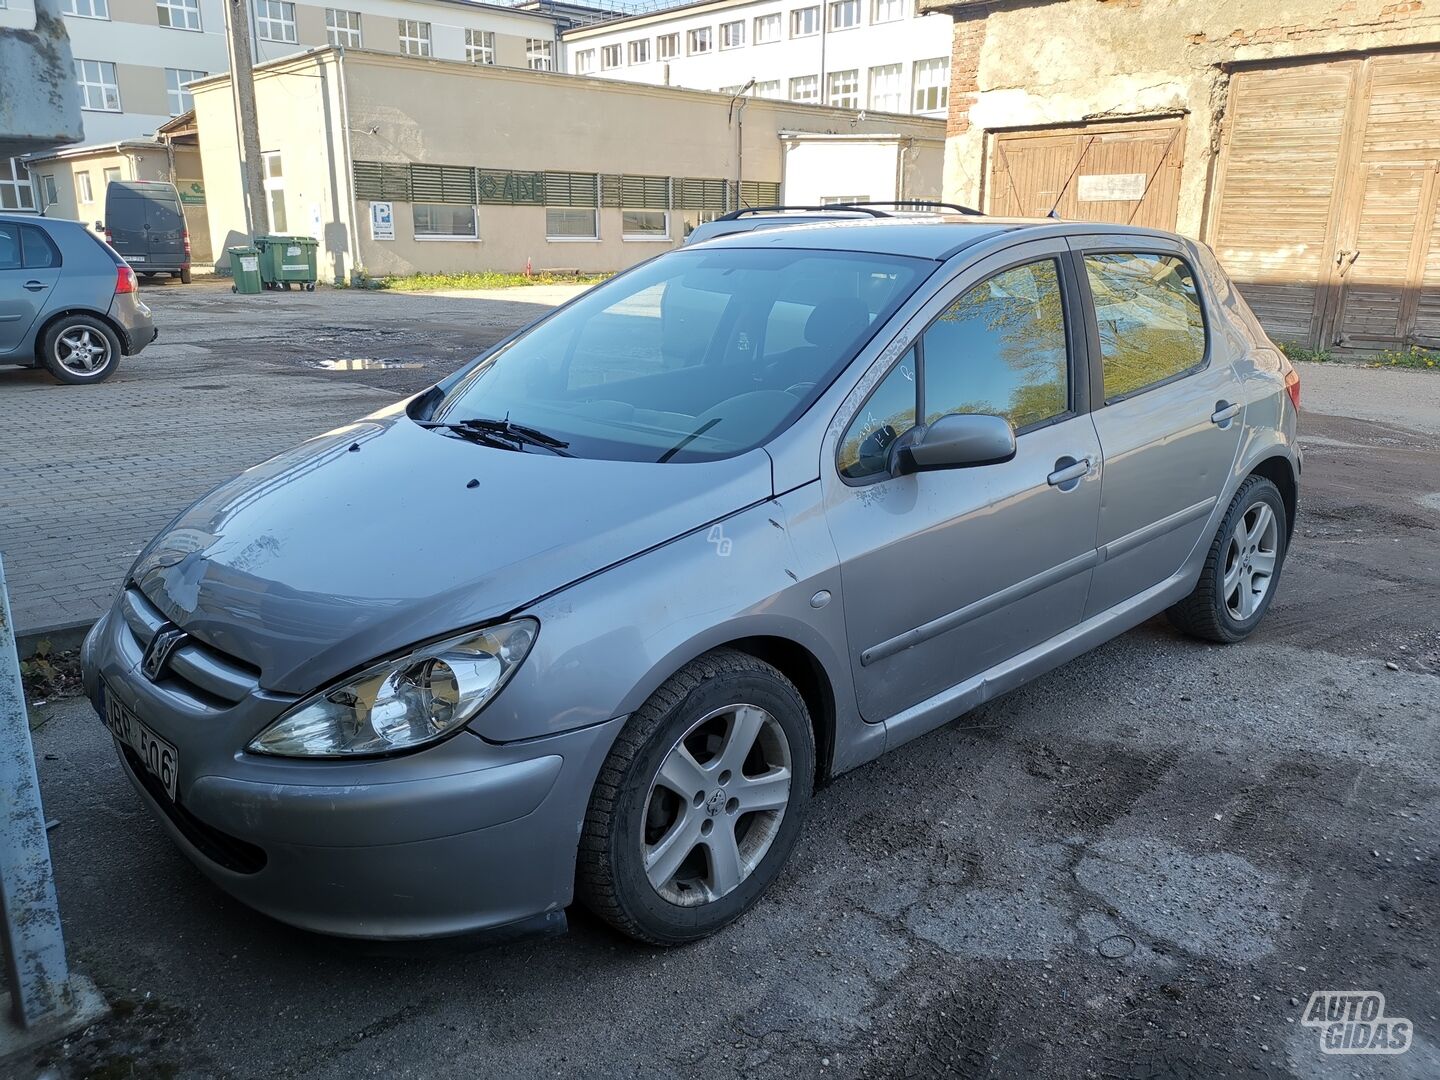 Peugeot 307 HDI Mistral 2005 y